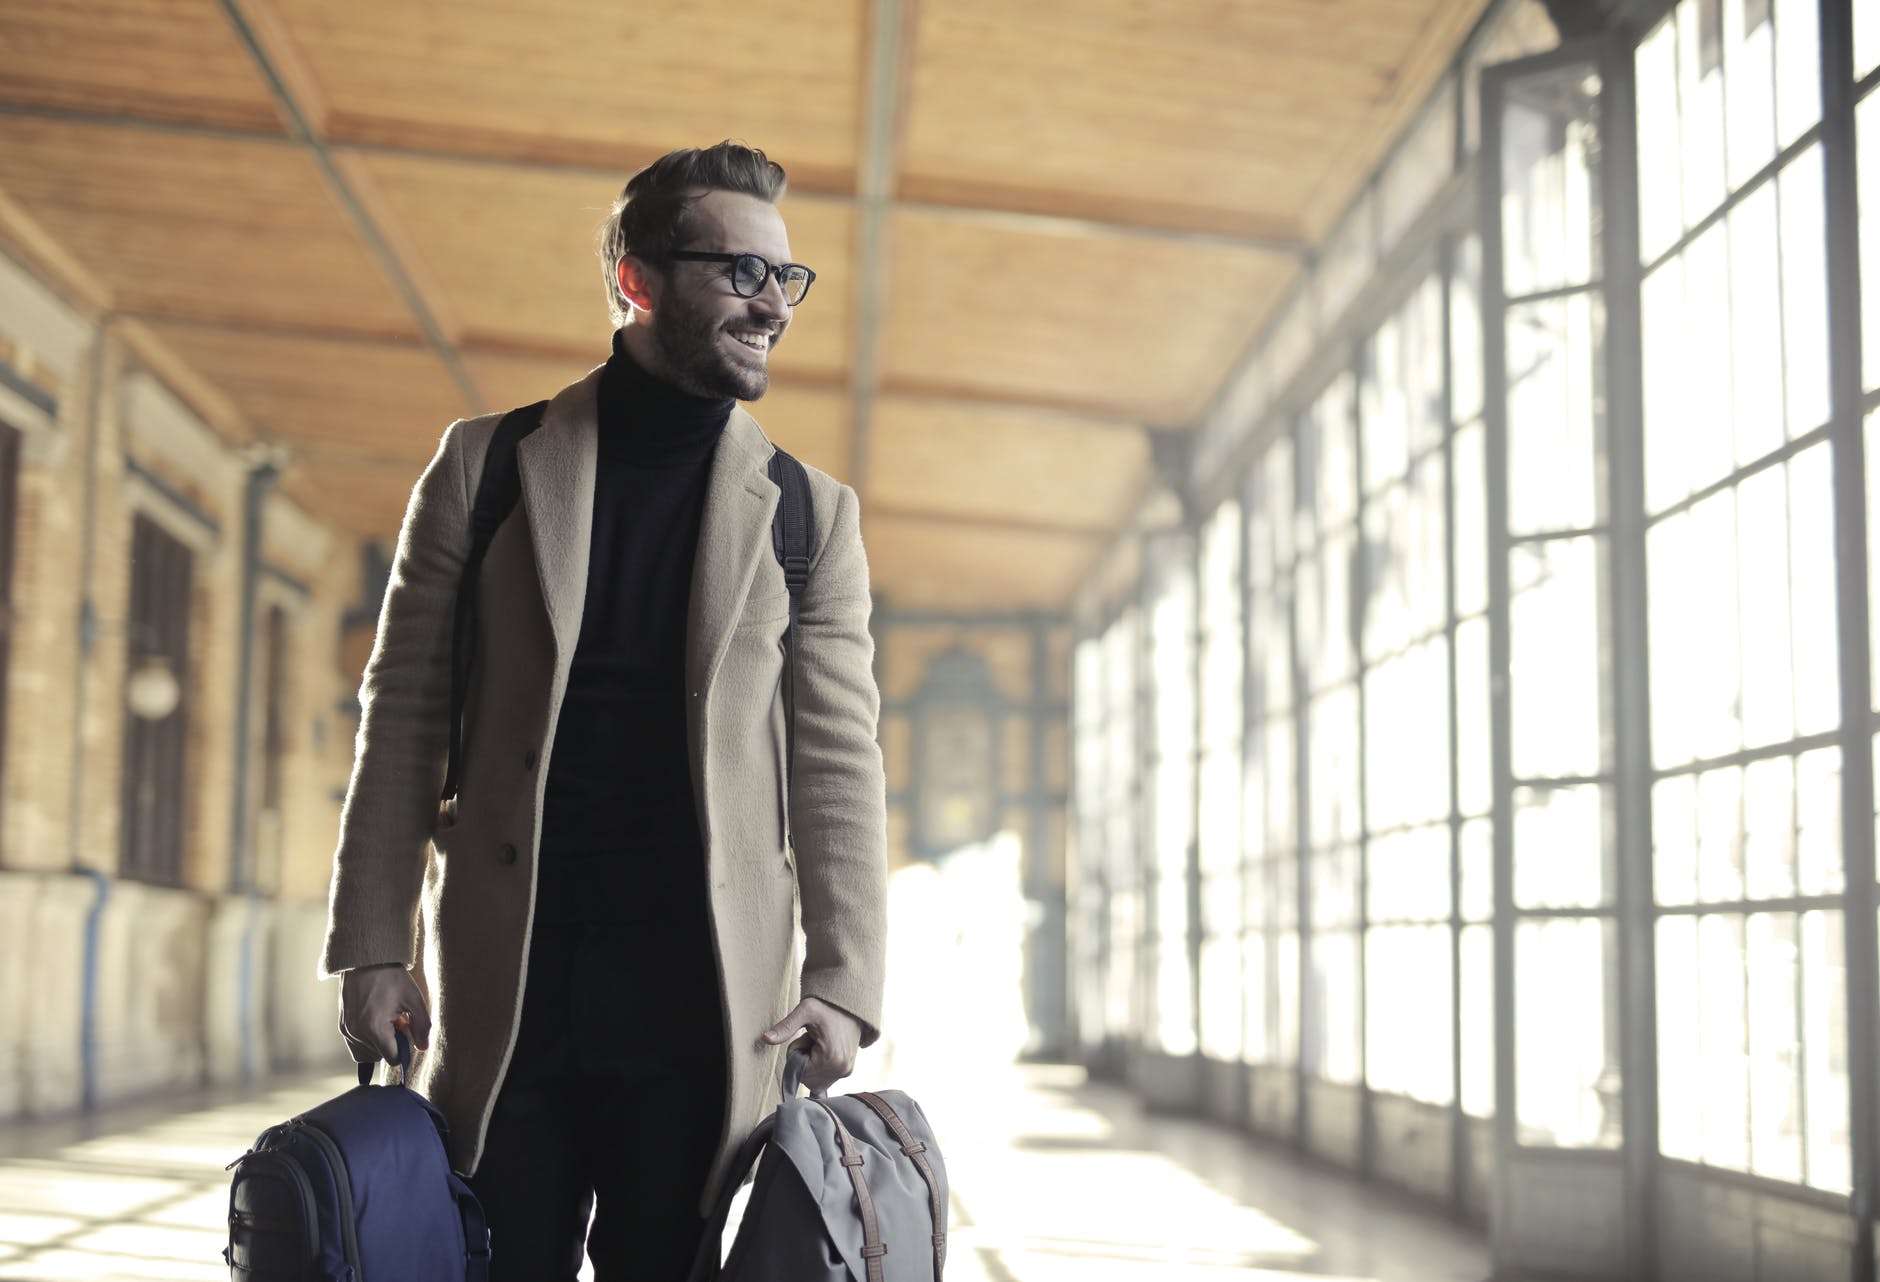 How to Make Business Travel Easier?